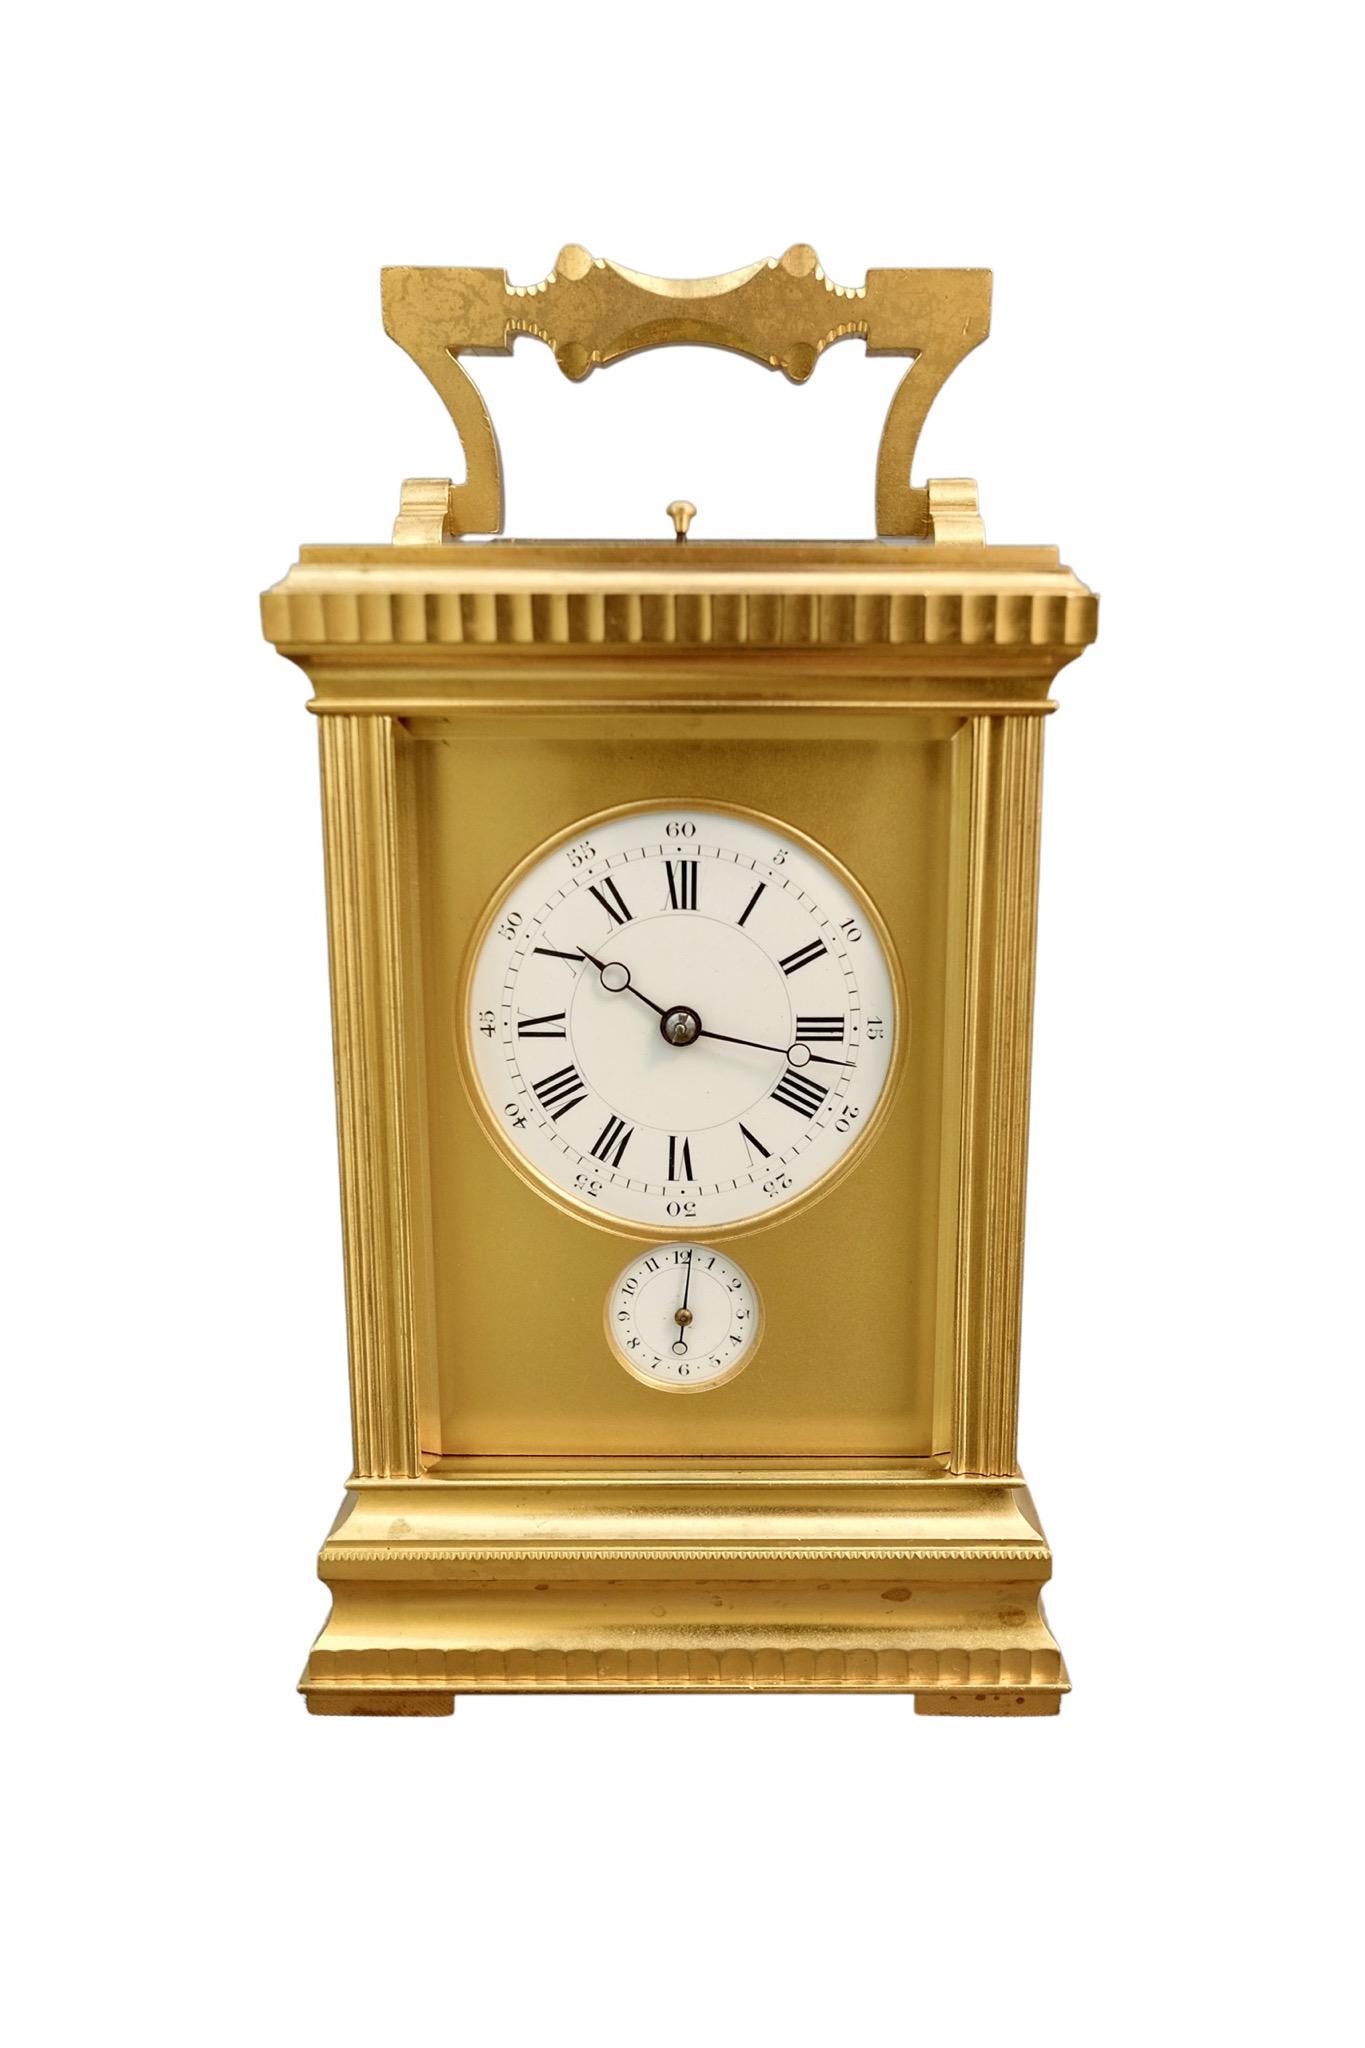 A very attractive French Petit sonnerie striking and repeating carriage clock. From Le Roy et Fils, Palais Royale, Paris, the clock is signed ‘LeRoy & Fils 13 & 15 Palis Royal Paris’ 10982.

The substantially made and fully glazed case with